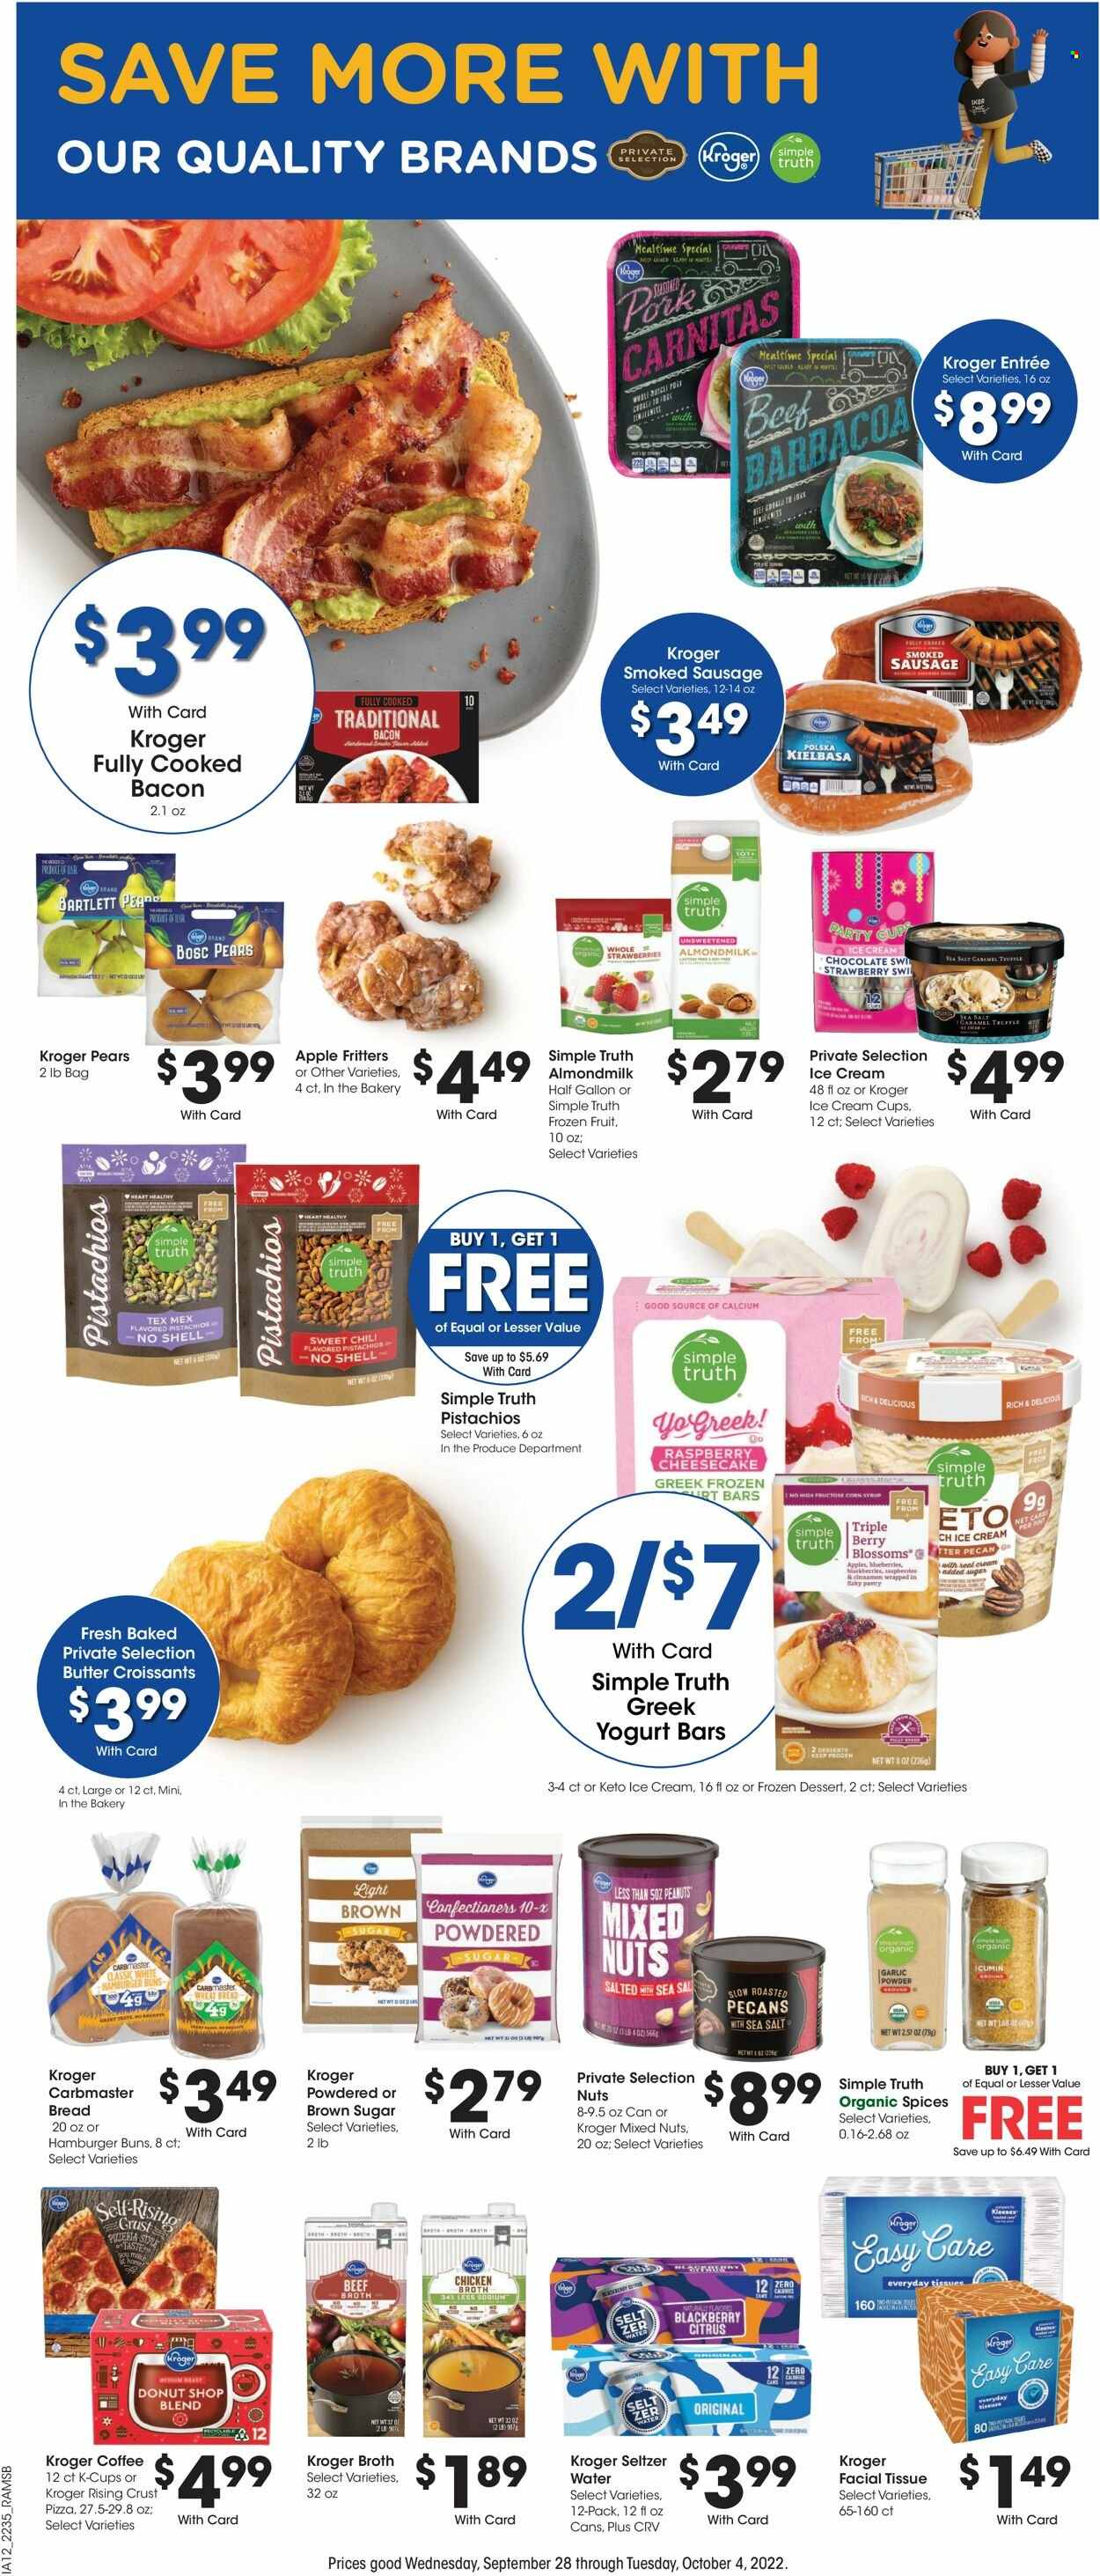 thumbnail - Ralphs Flyer - 09/28/2022 - 10/04/2022 - Sales products - wheat bread, cake, croissant, buns, burger buns, apples, strawberries, pears, pizza, bacon, sausage, smoked sausage, kielbasa, greek yoghurt, almond milk, ice cream, Enlightened lce Cream, truffles, beef broth, chicken broth, broth, garlic powder, cinnamon, peanuts, pecans, pistachios, mixed nuts, seltzer water, coffee, coffee capsules, K-Cups, Kleenex, tissues. Page 8.